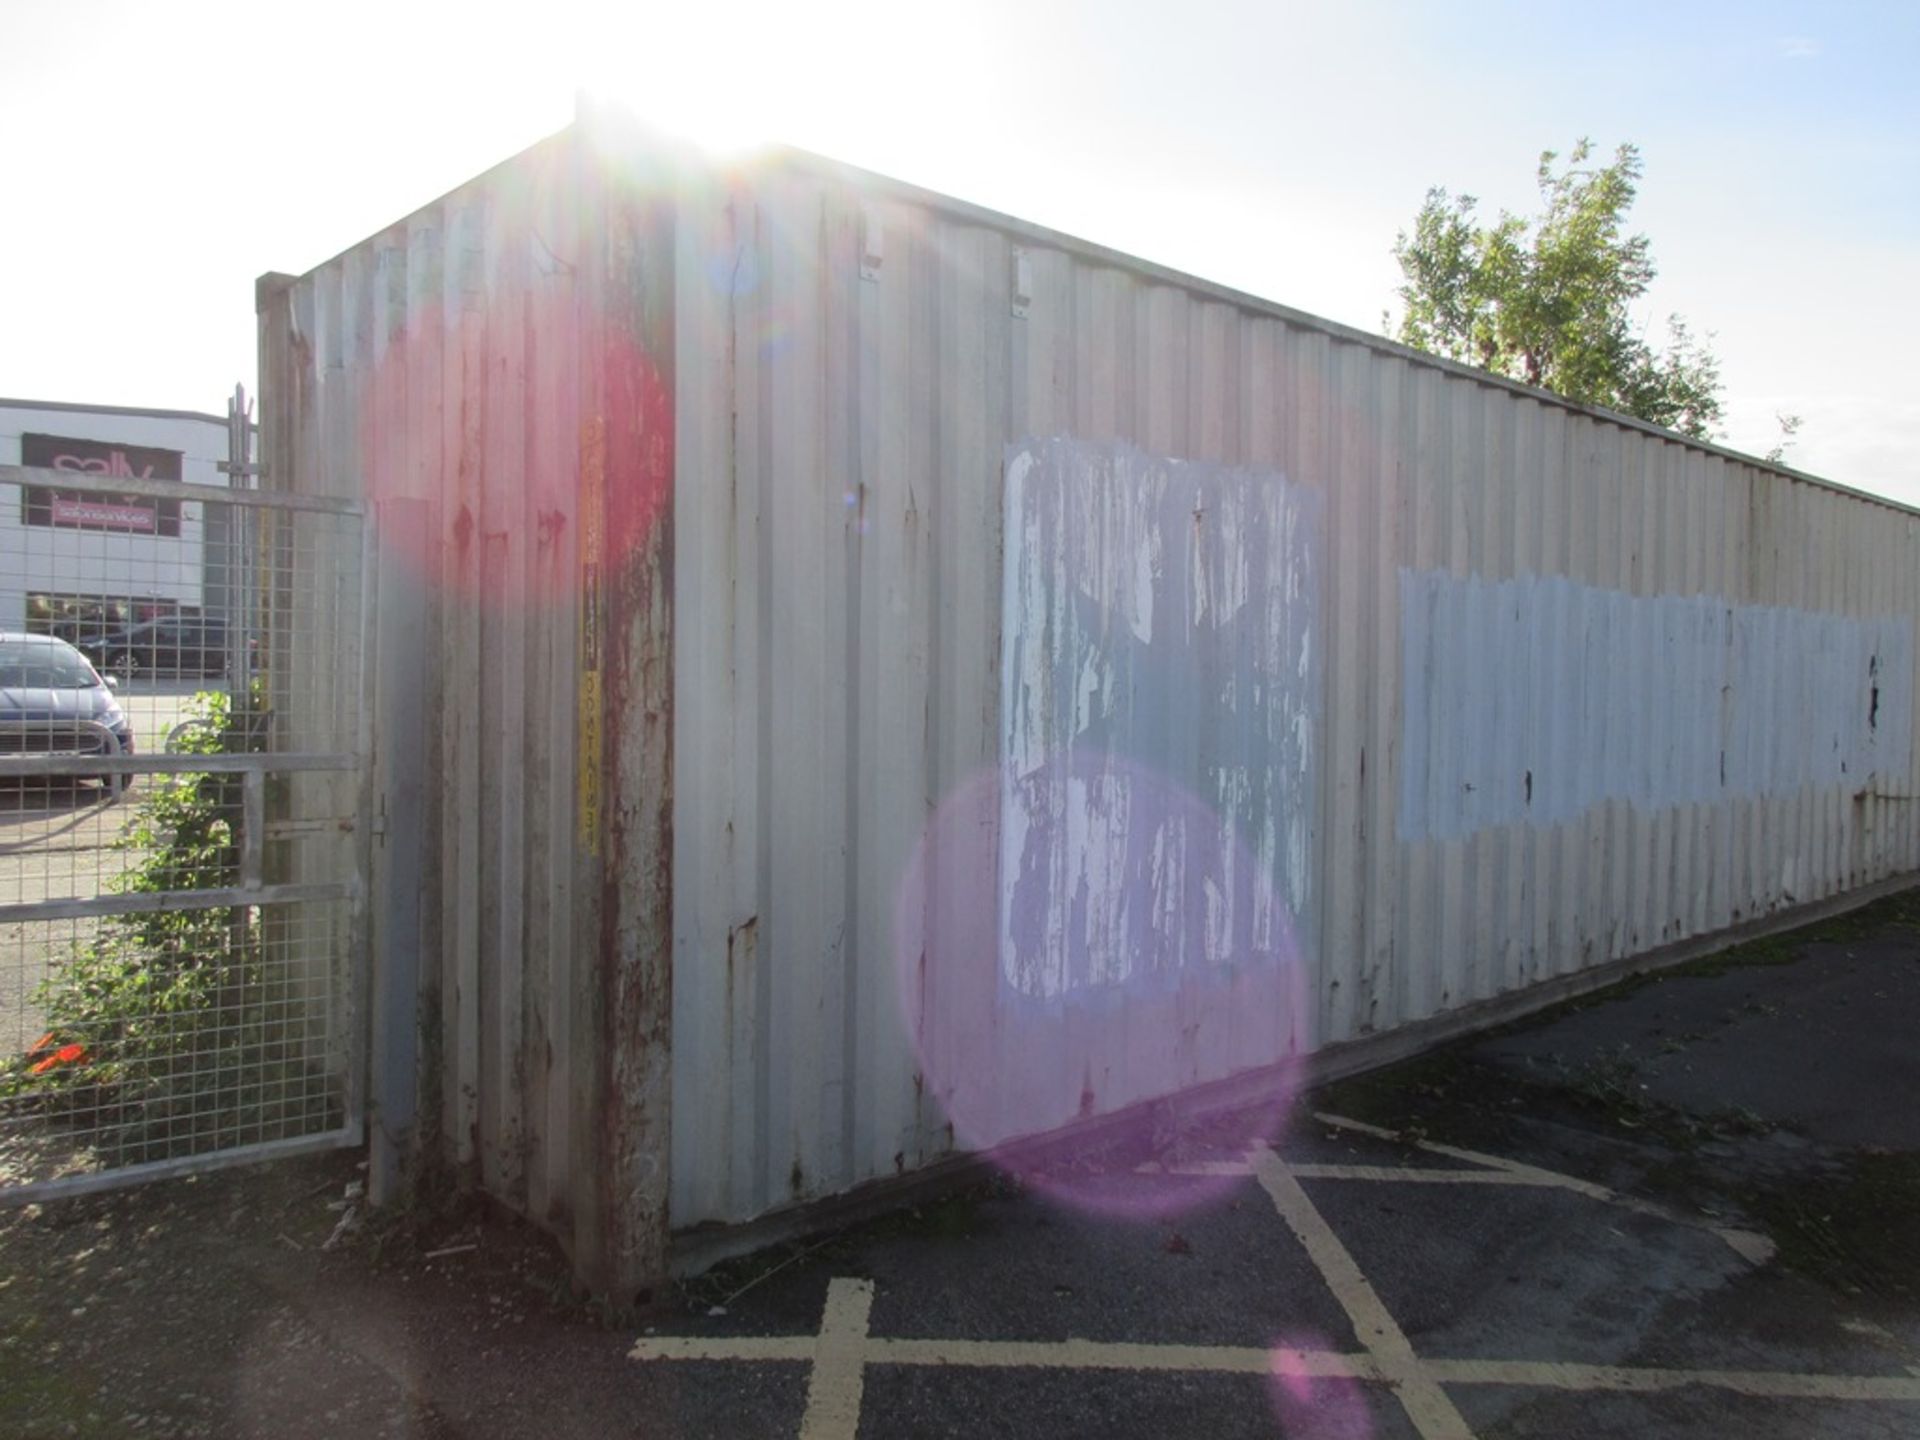 Export type extra height shipping container, 40ft - Image 3 of 4